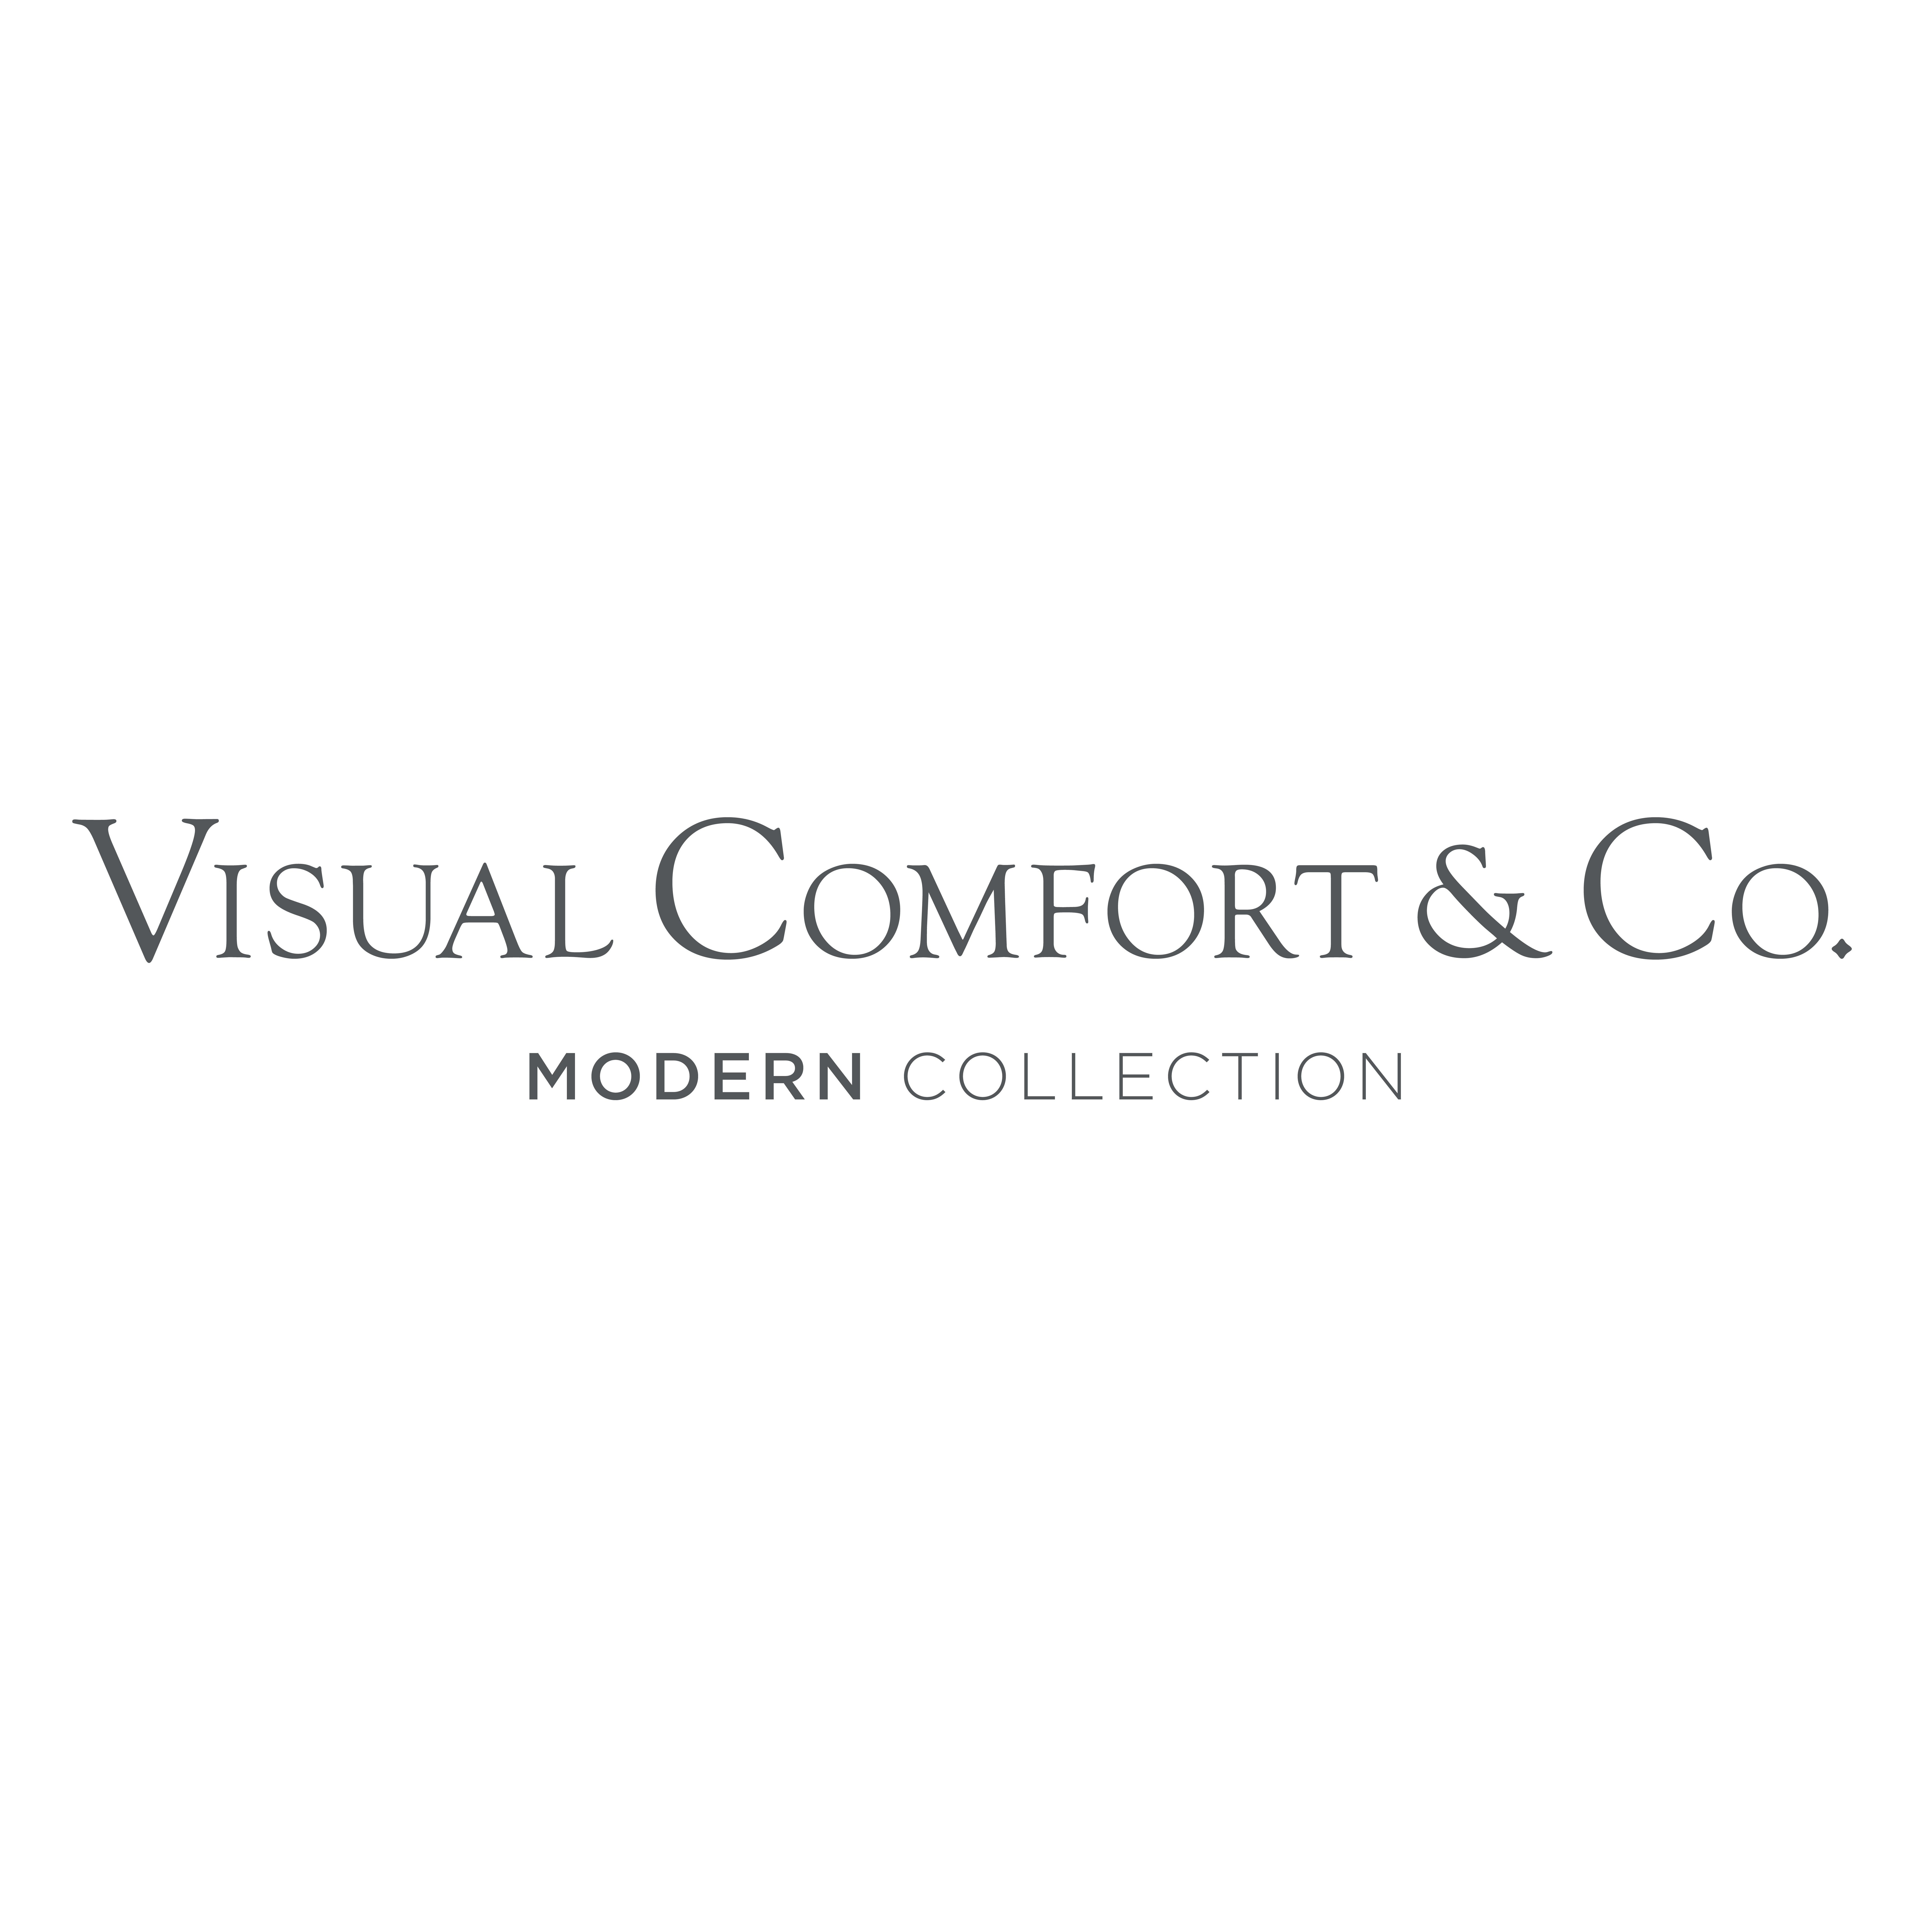 Visual Comfort & Co. Modern Collection